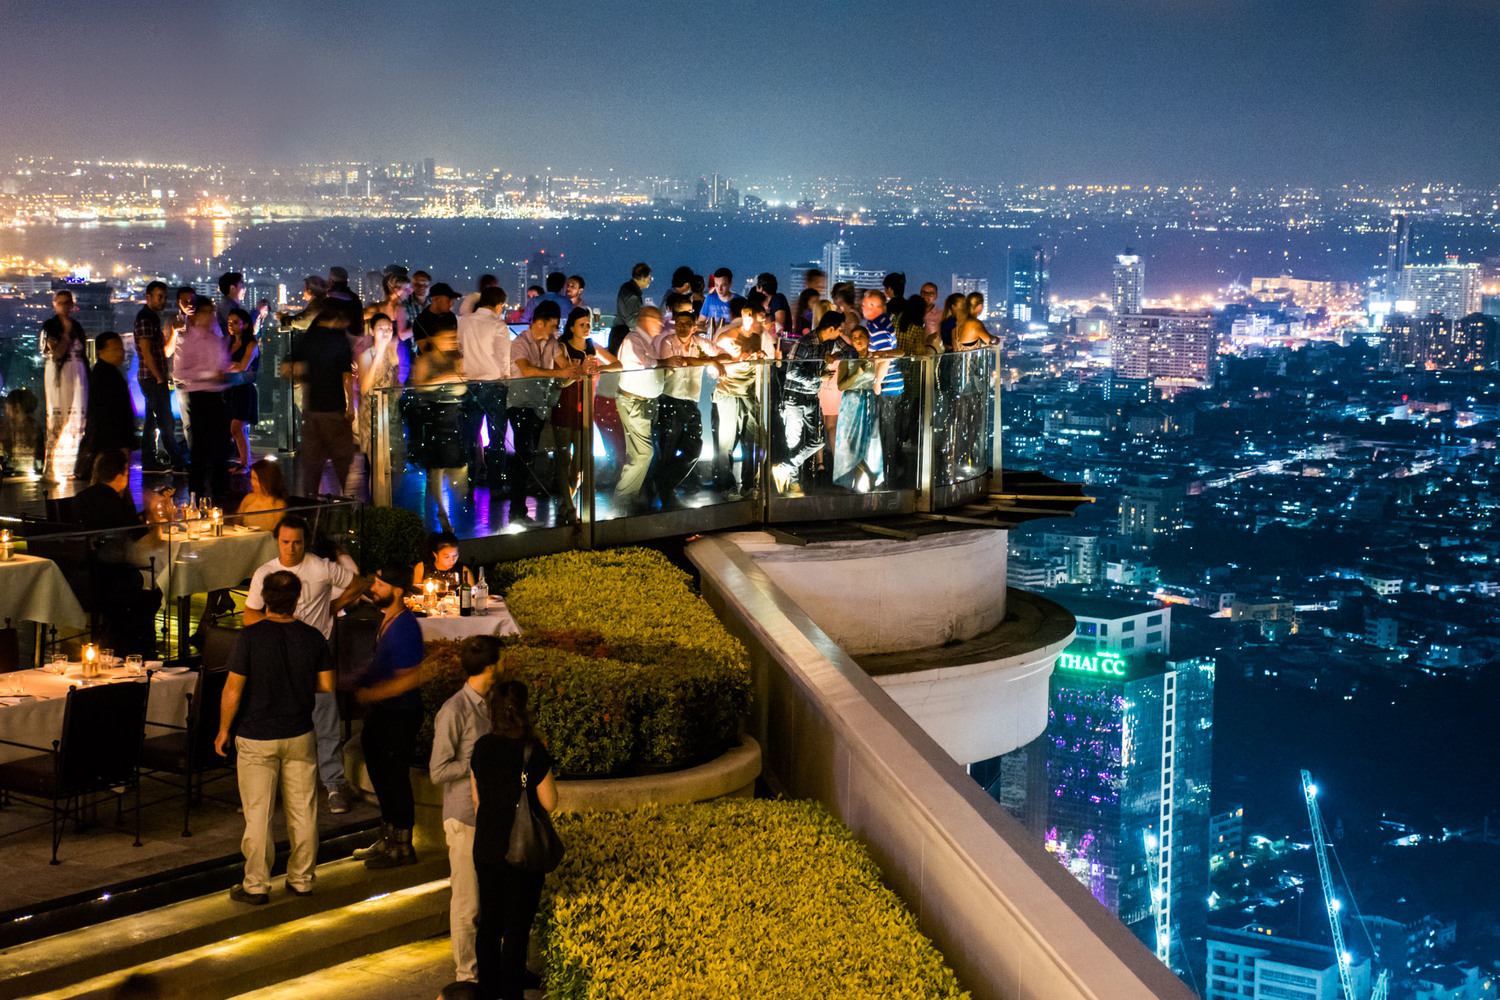 Which district is famous for its bustling nightlife and entertainment?